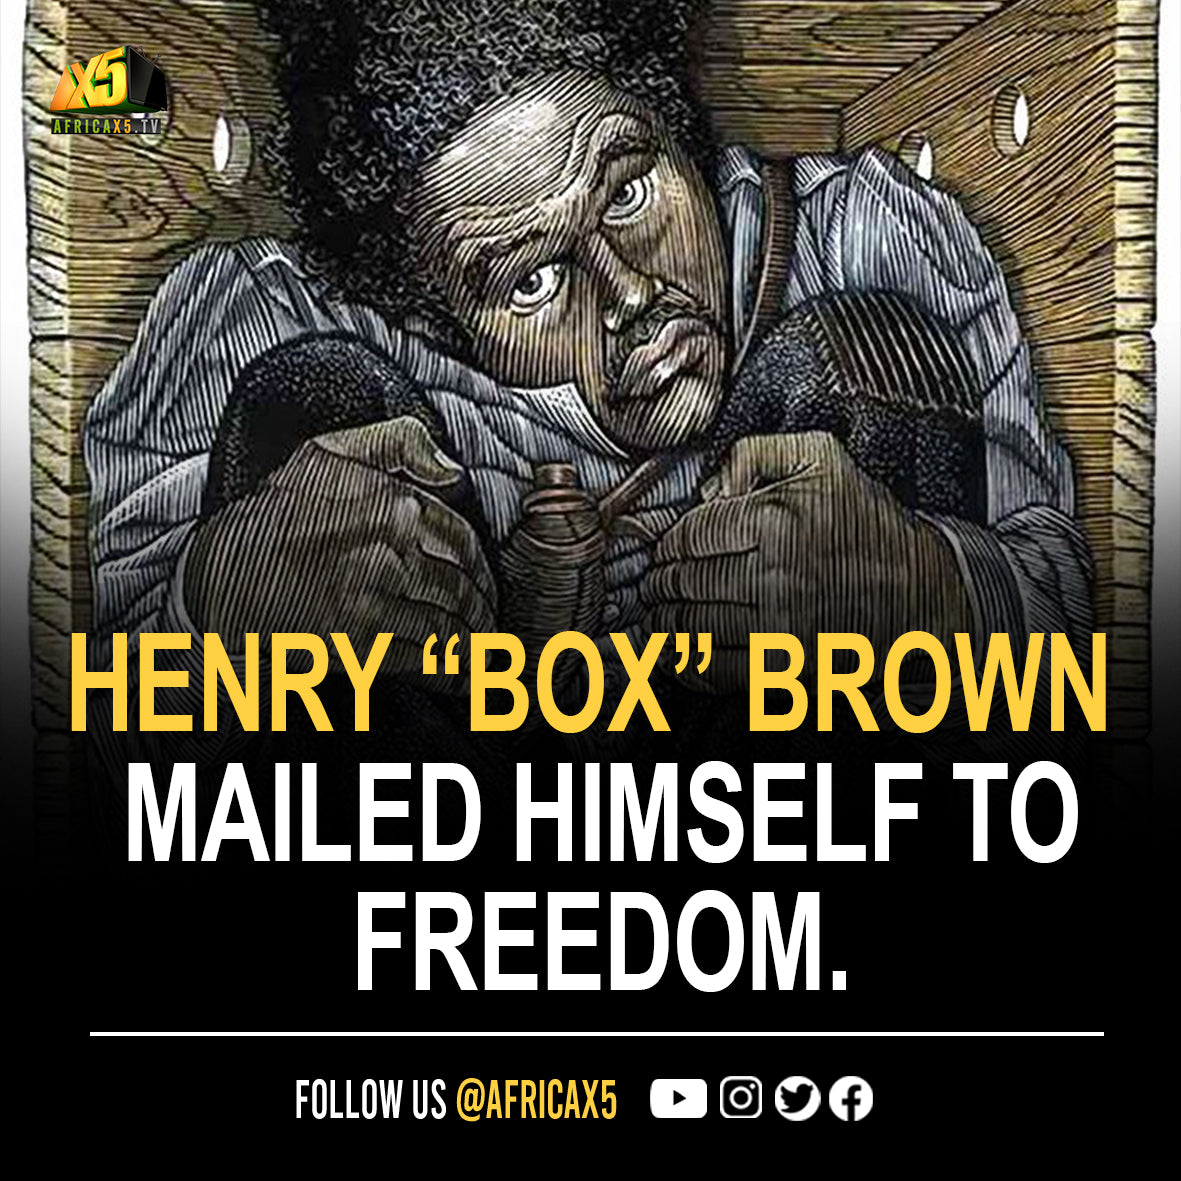 Henry "Box" Brown, the 19th century enslaved man from Virginia (later a noted abolitionist speaker), escaped to freedom by mailing himself in a wooden crate.